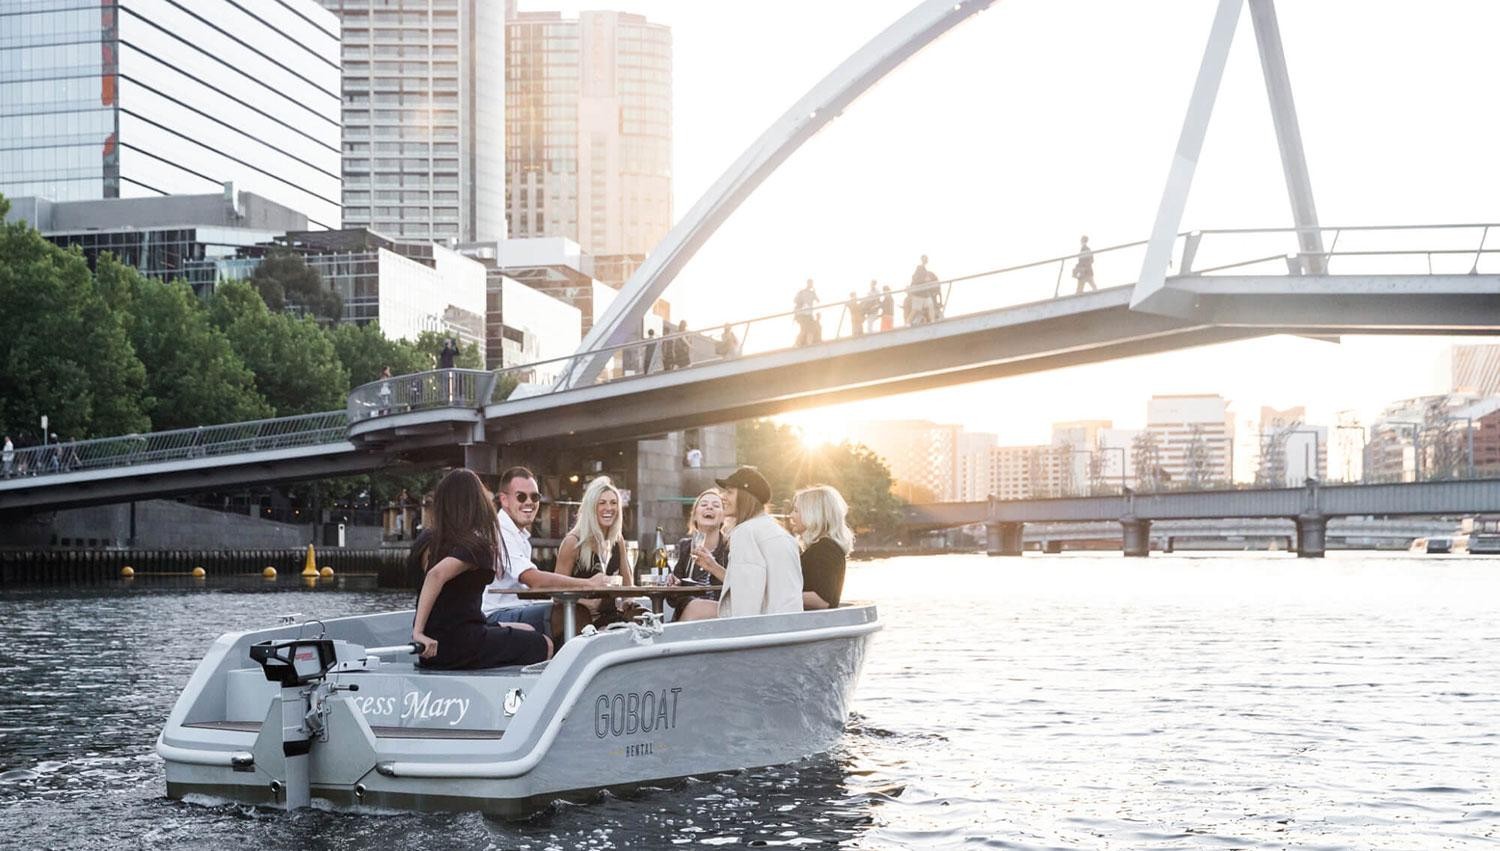 Shared electric mobility on the water: GoBoat has saved 800,000 metric tons of CO2 since 2014 in cities like London and Melbourne. 